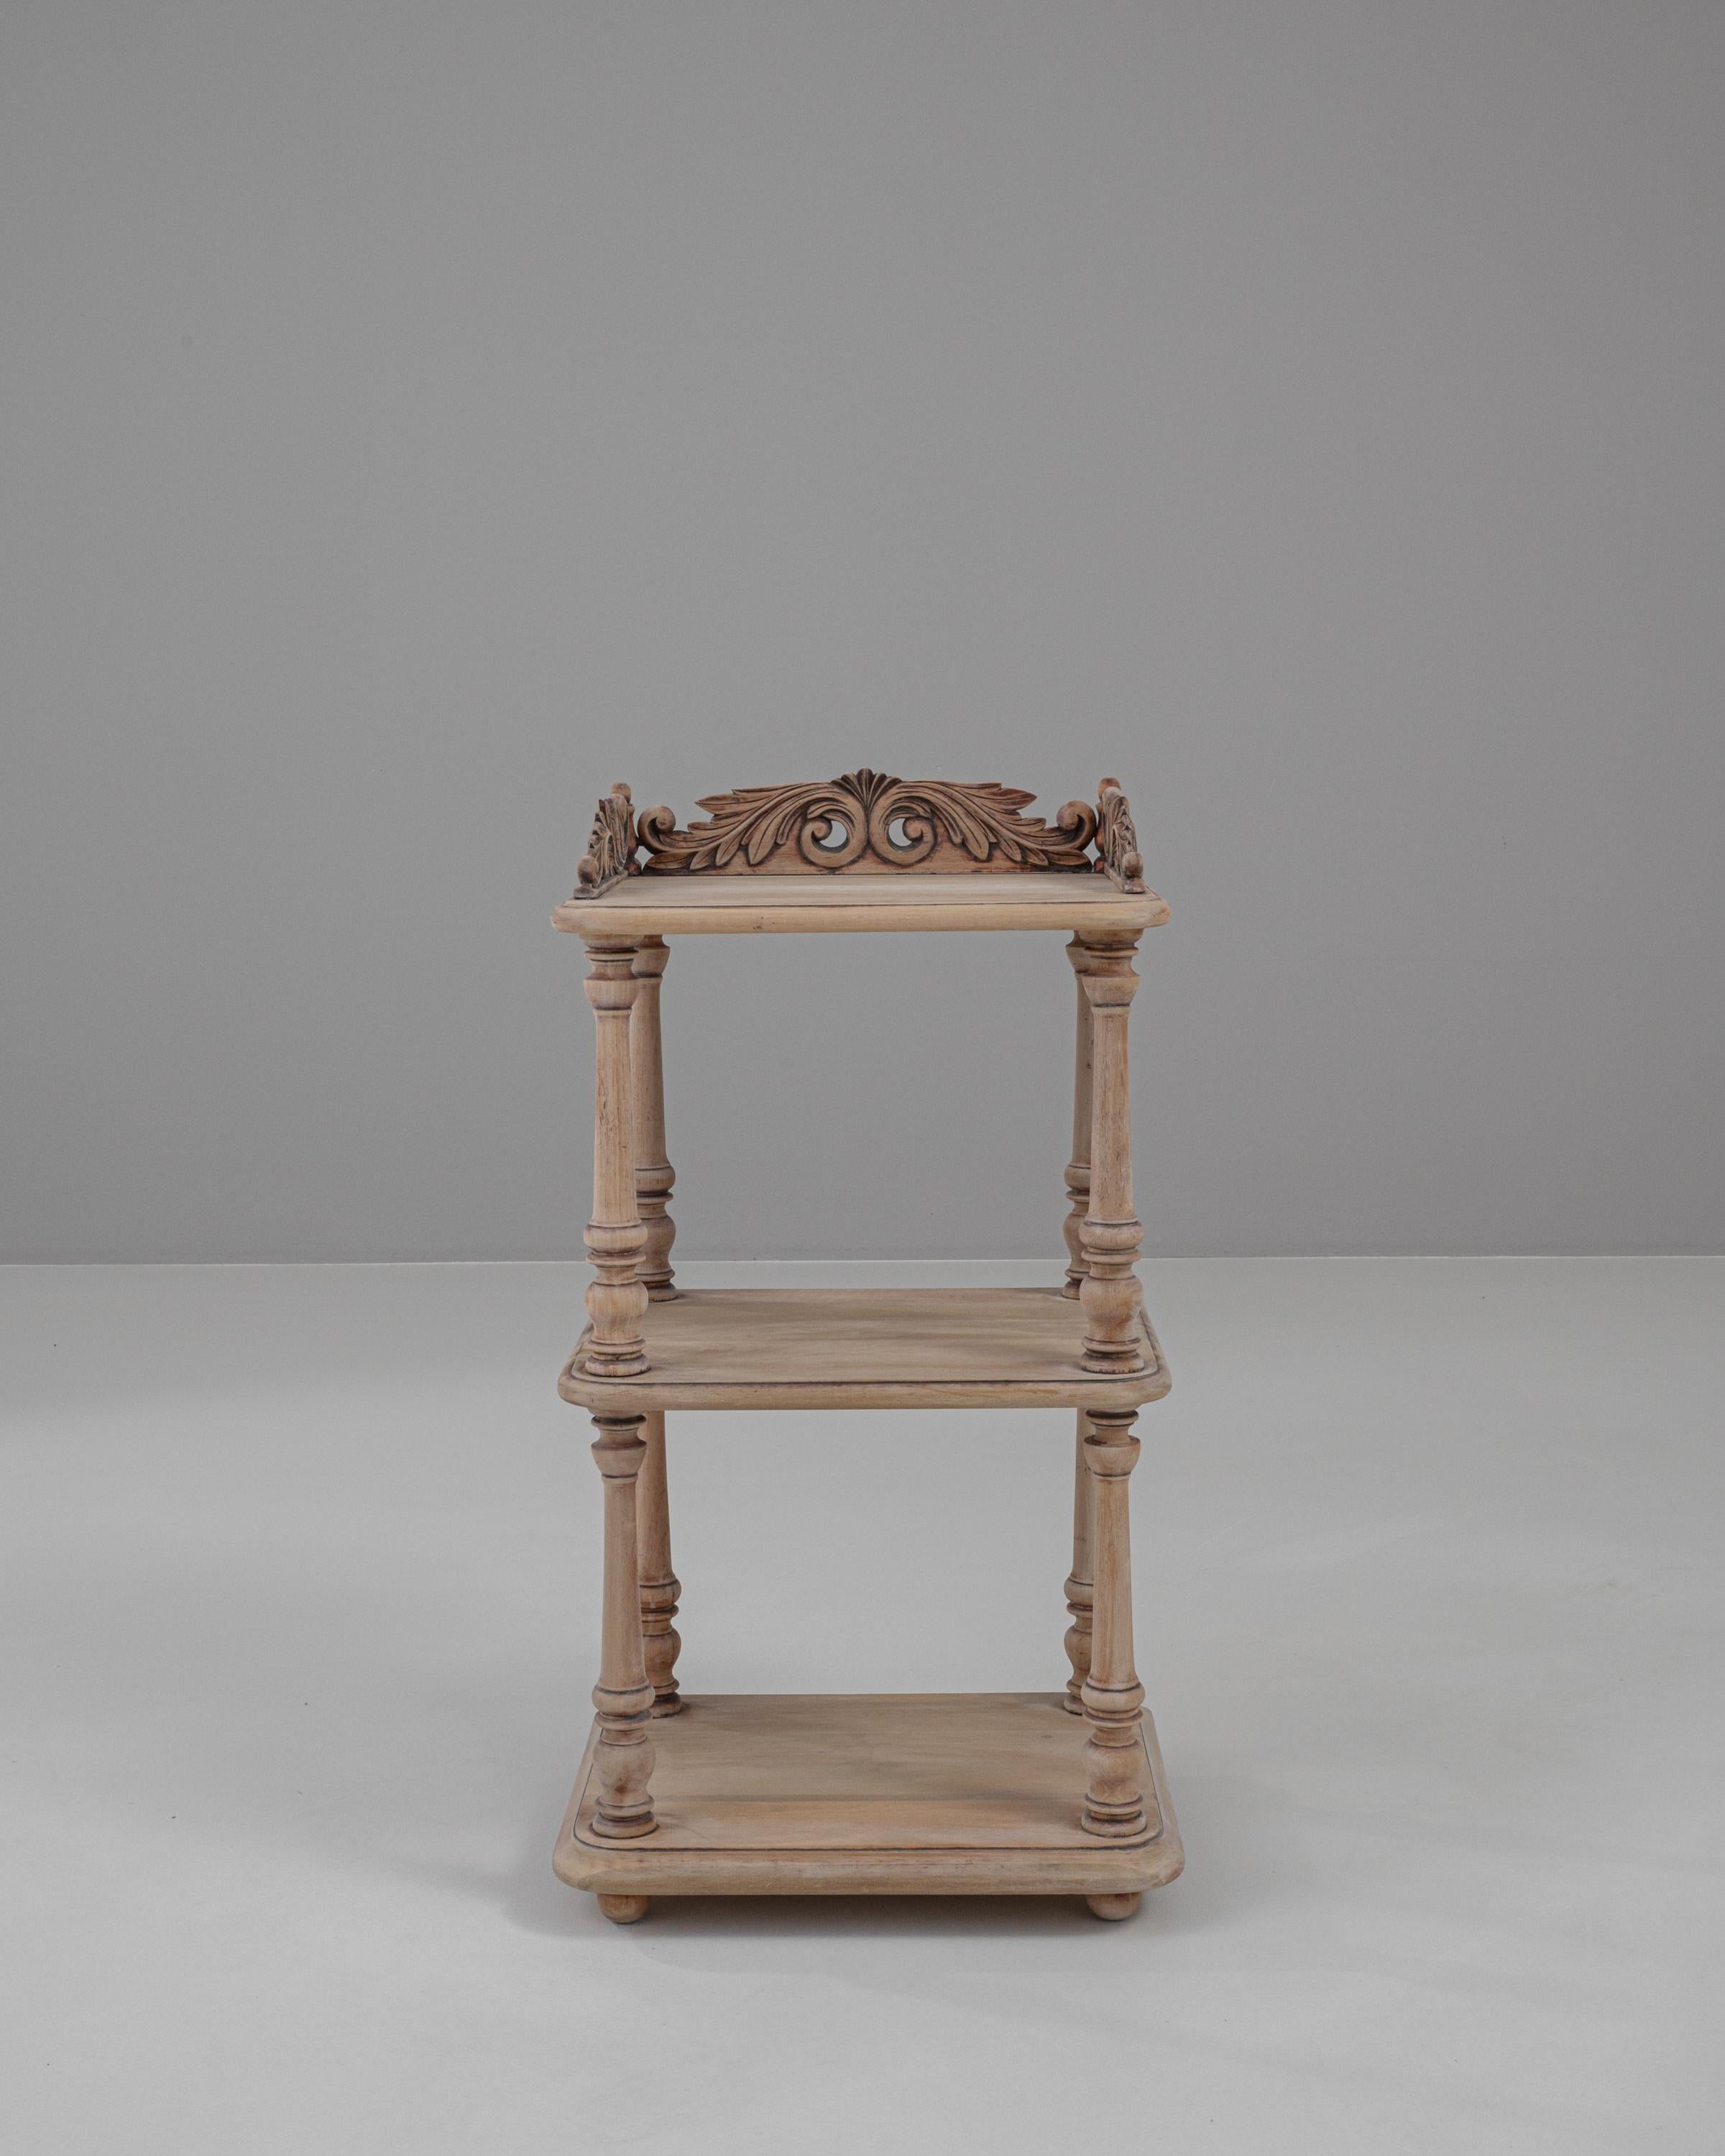 Add an element of refined grace to your bedroom with this 19th Century French bedside table, beautifully crafted from bleached oak. This elegant piece features ornate carvings along the top rail, showcasing exquisite floral motifs that are testament